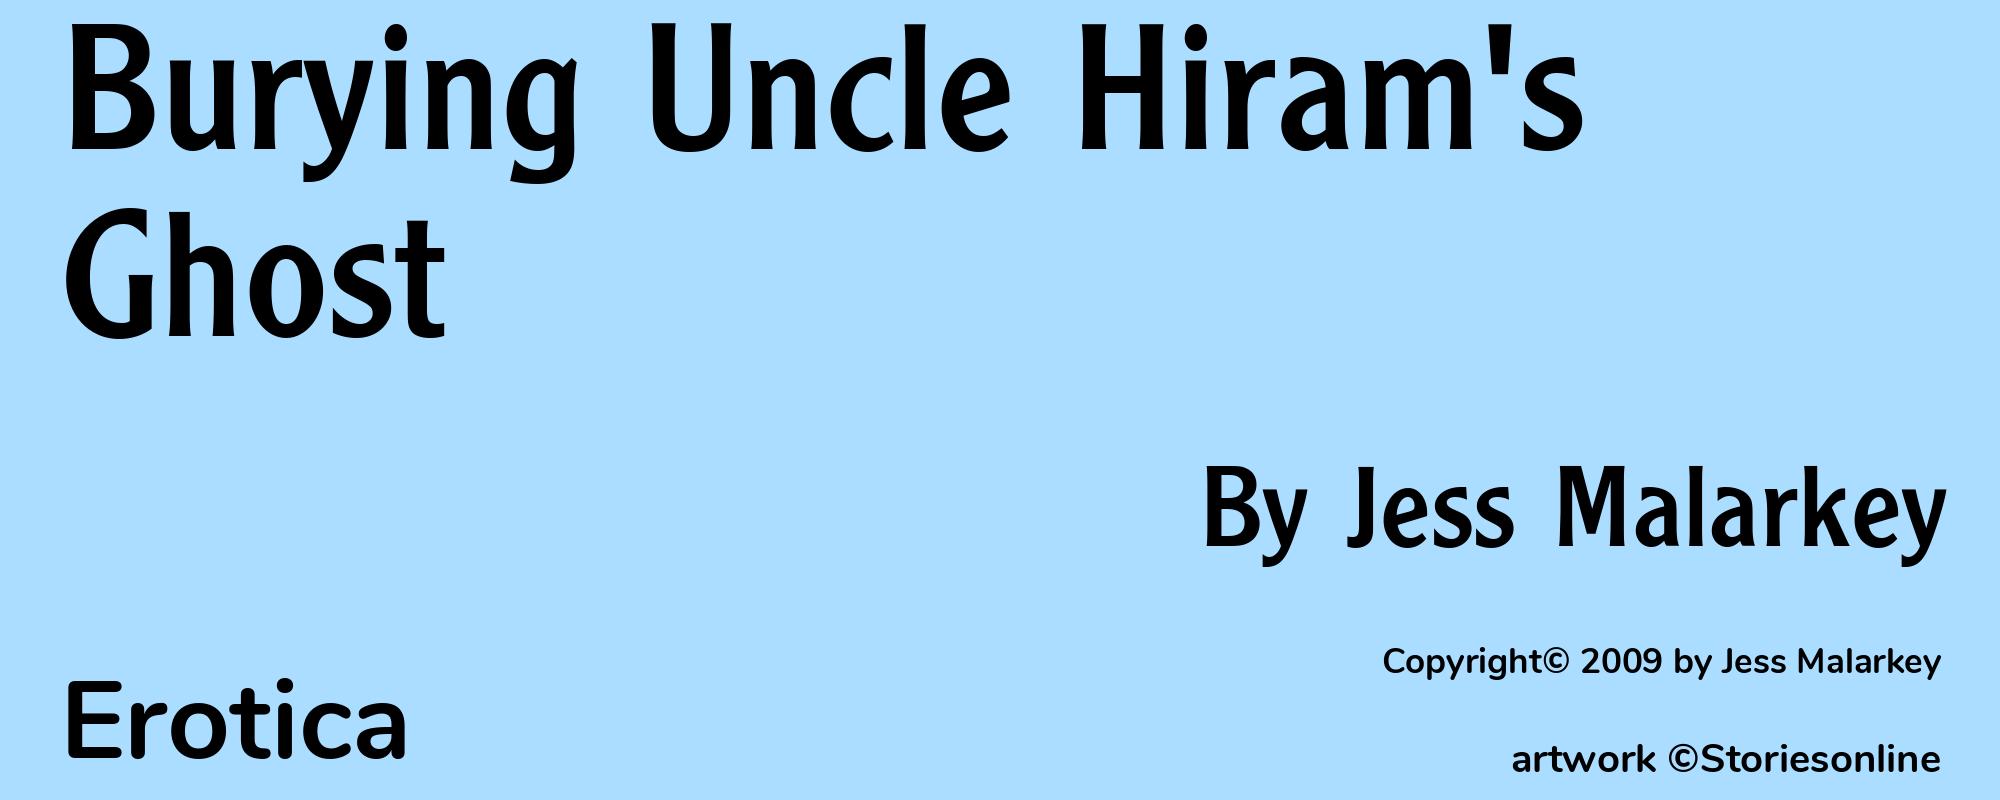 Burying Uncle Hiram's Ghost - Cover